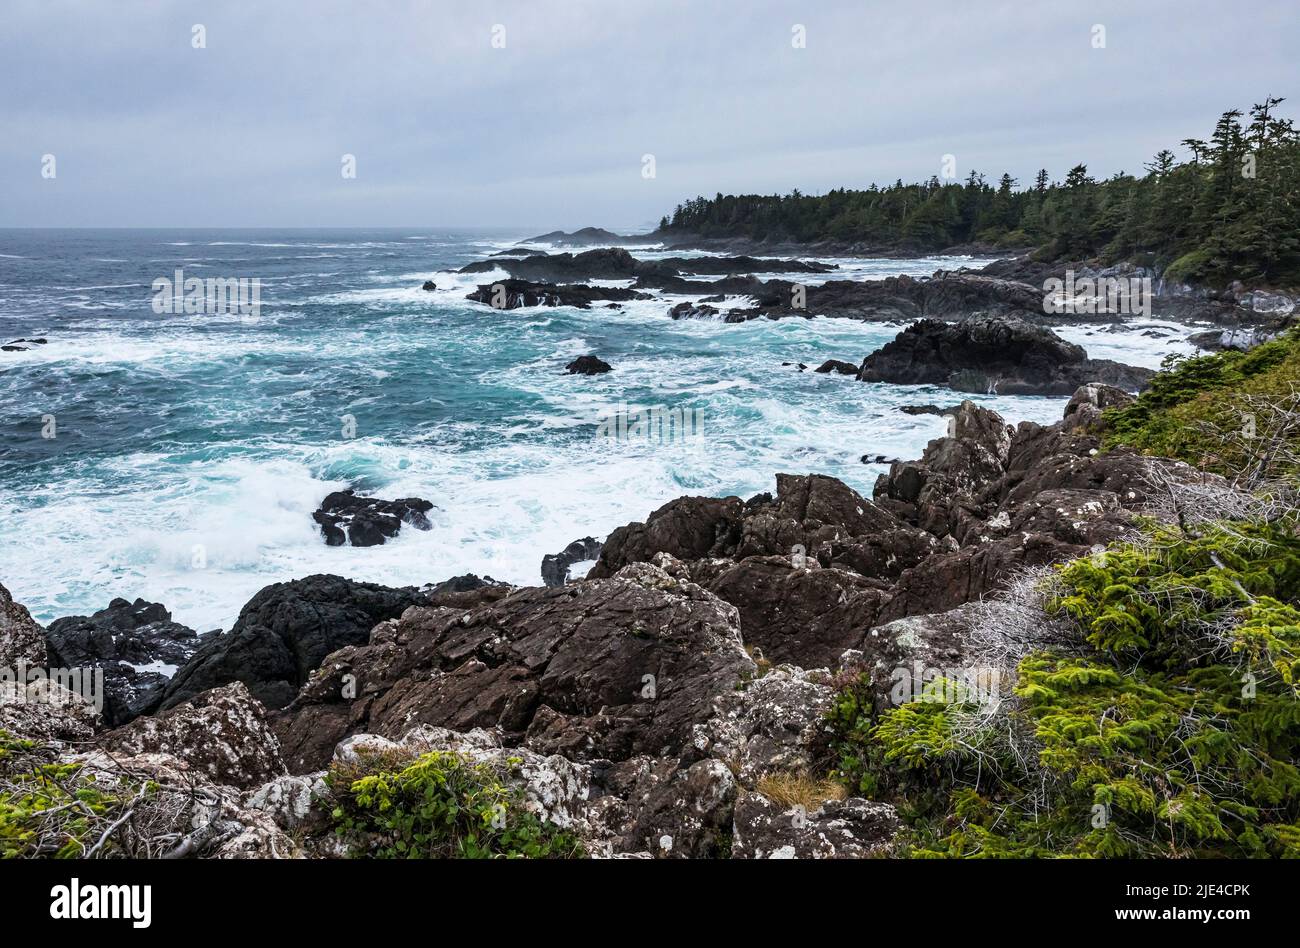 The Pacific Ocean and coastline of Vancouver Island near Ucluelet, BC, Canada. Stock Photo